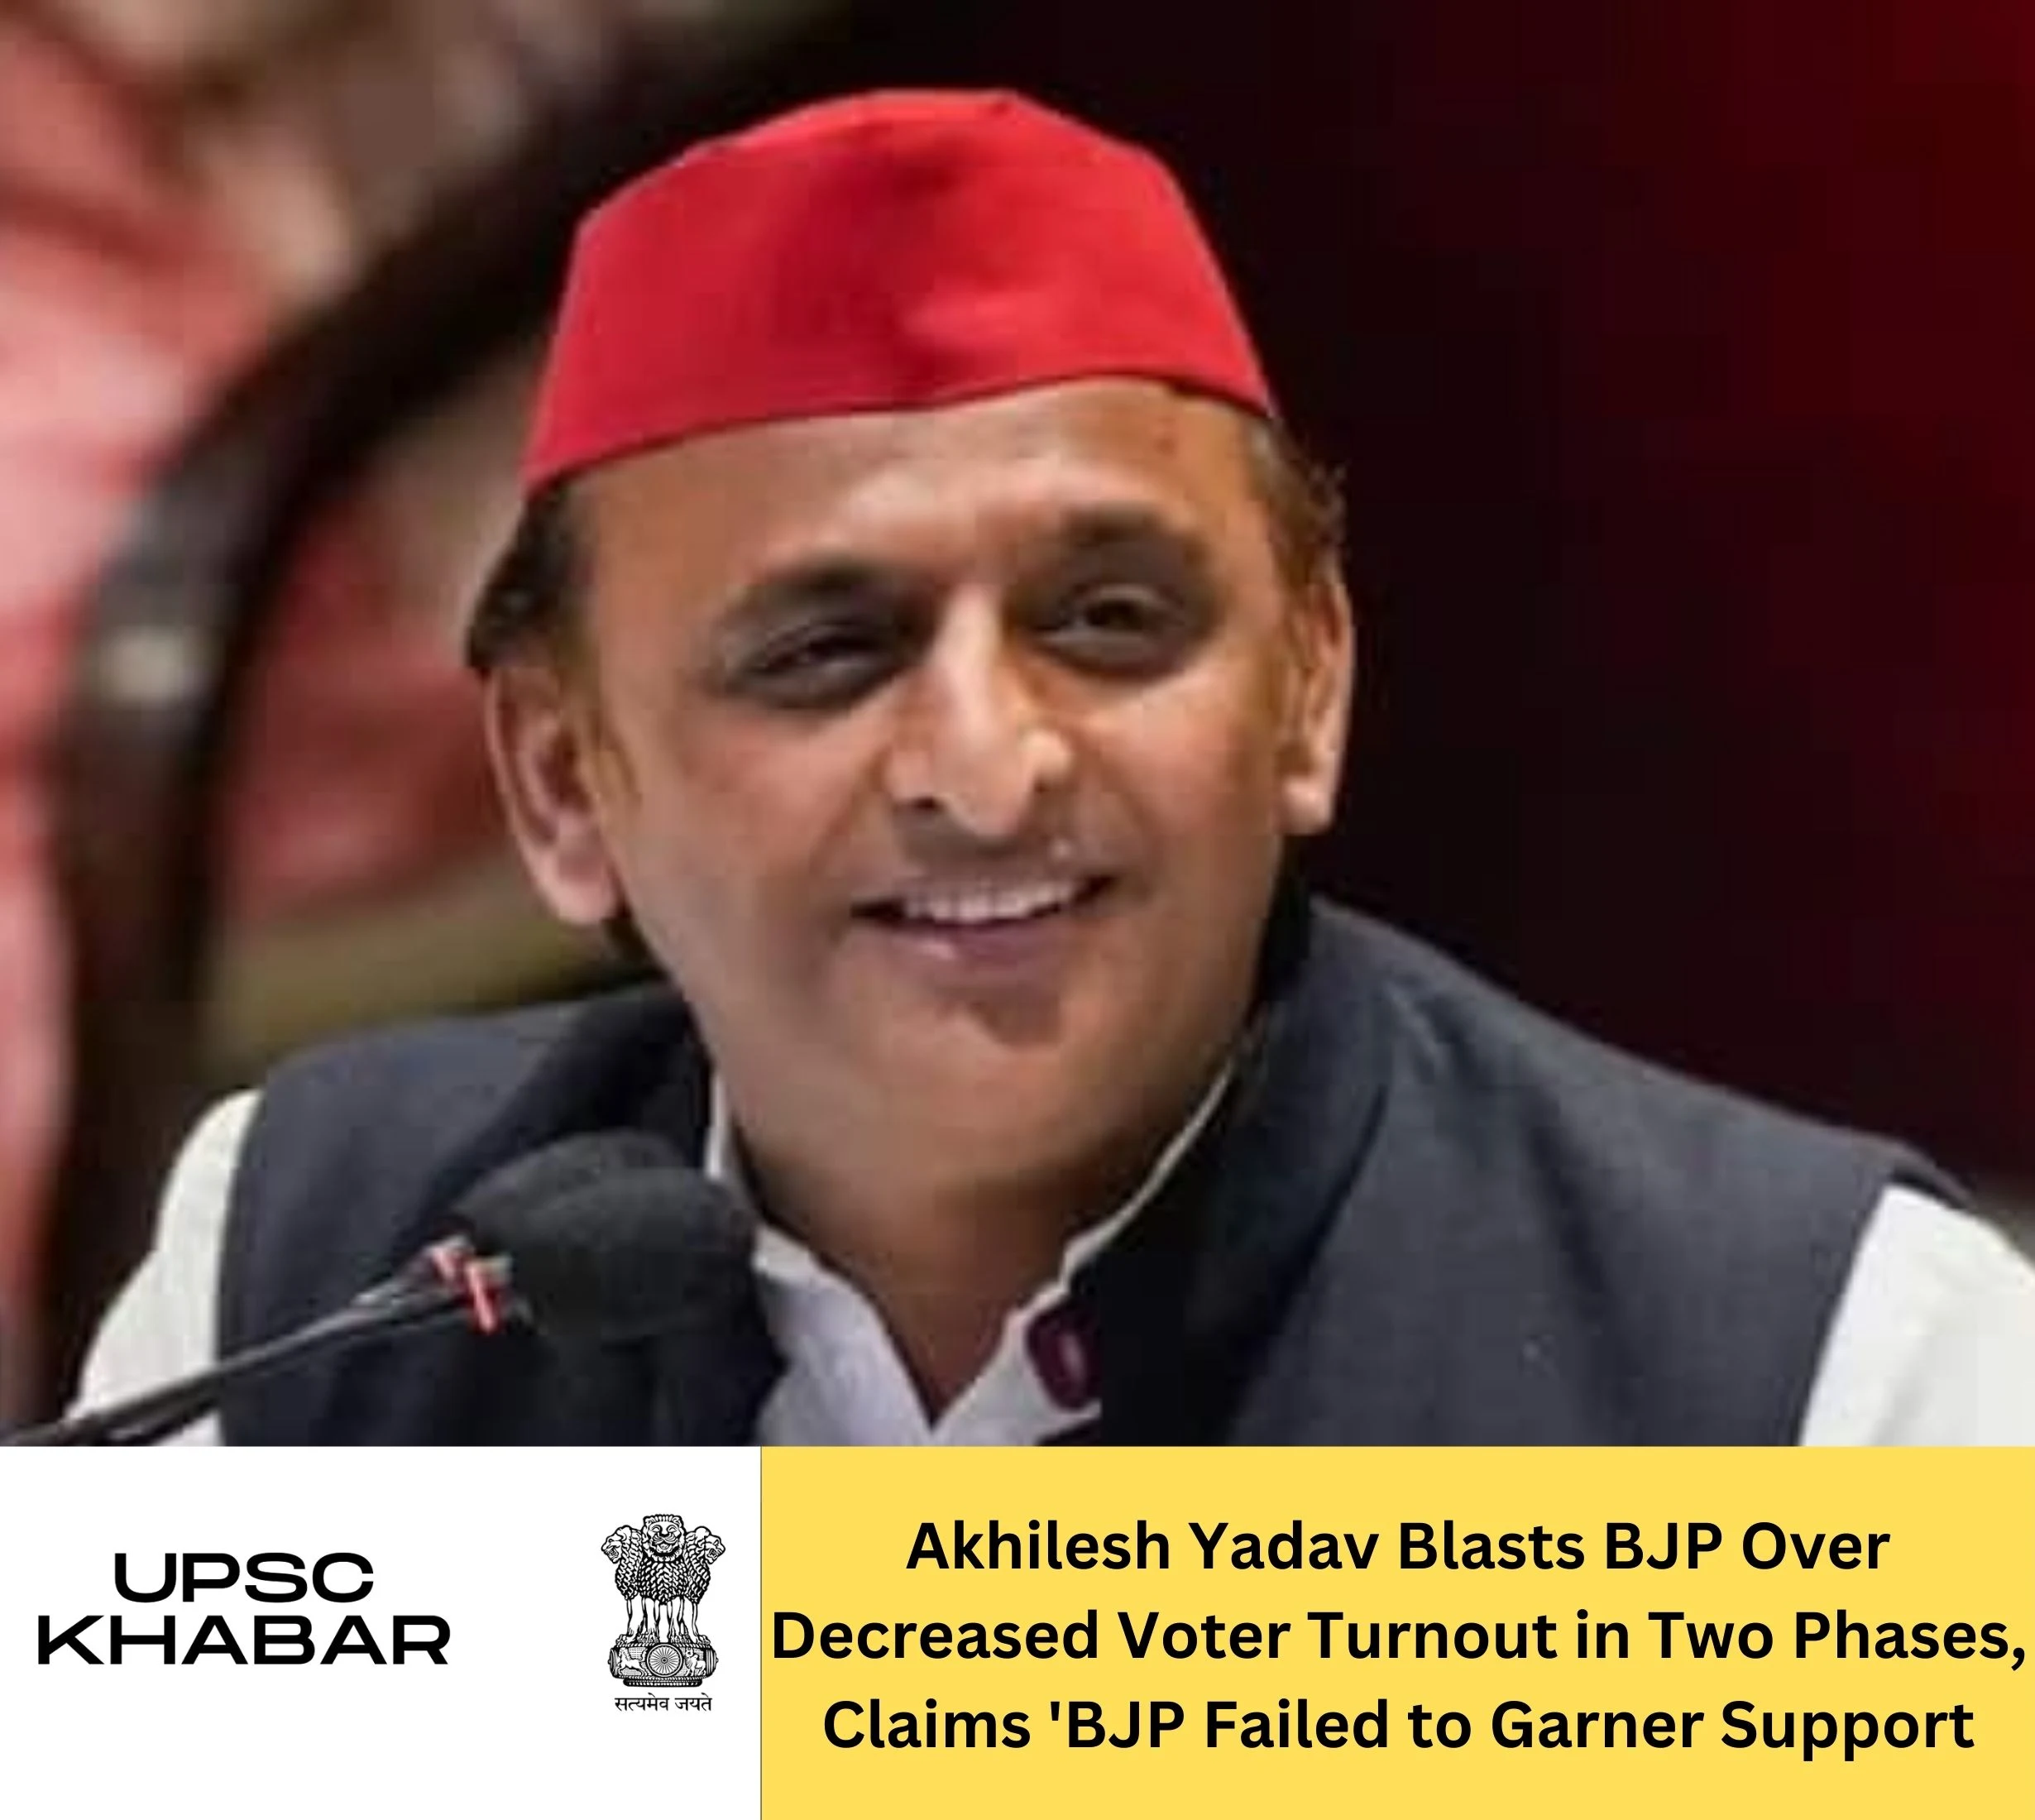 Akhilesh Yadav Blasts BJP Over Decreased Voter Turnout in Two Phases, Claims 'BJP Failed to Garner Support